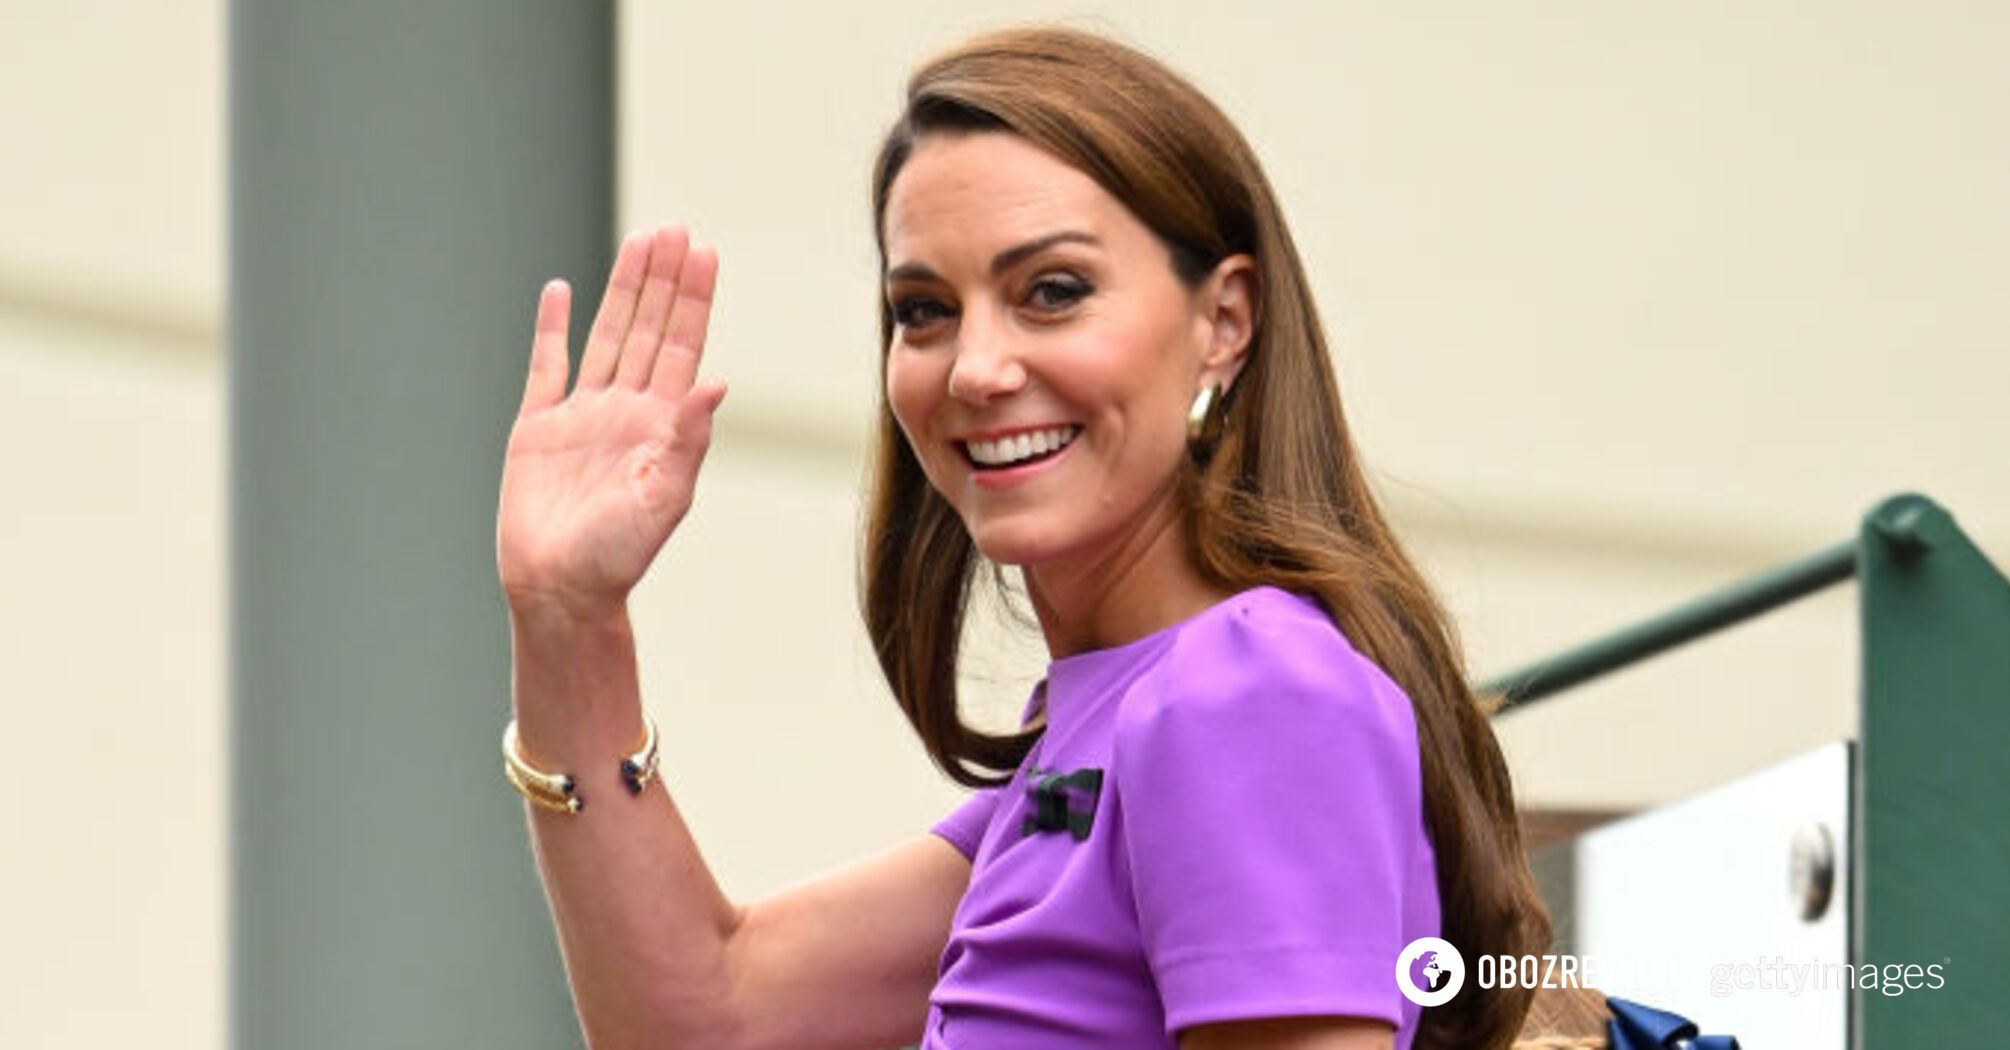 Smiling and in an elegant look: Kate Middleton appeared in public with daughter Charlotte. Photo